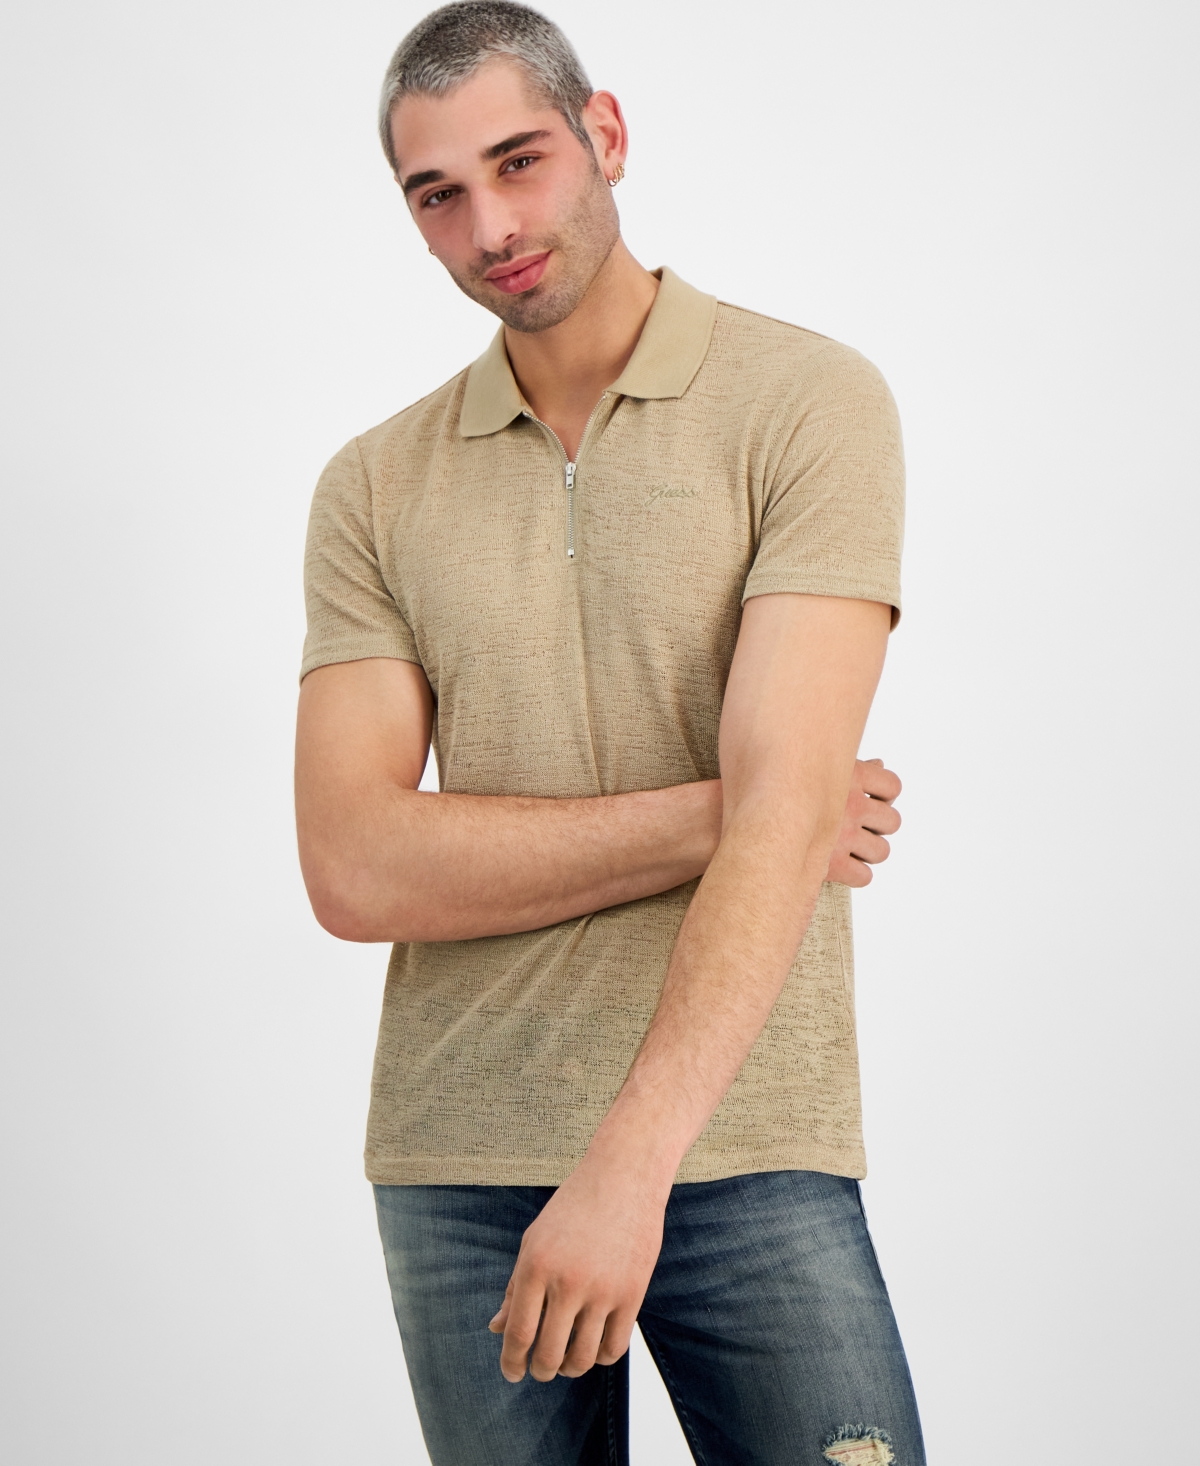 Guess Men's Gauze Jersey Zip-front Polo Shirt In Neutral Sand